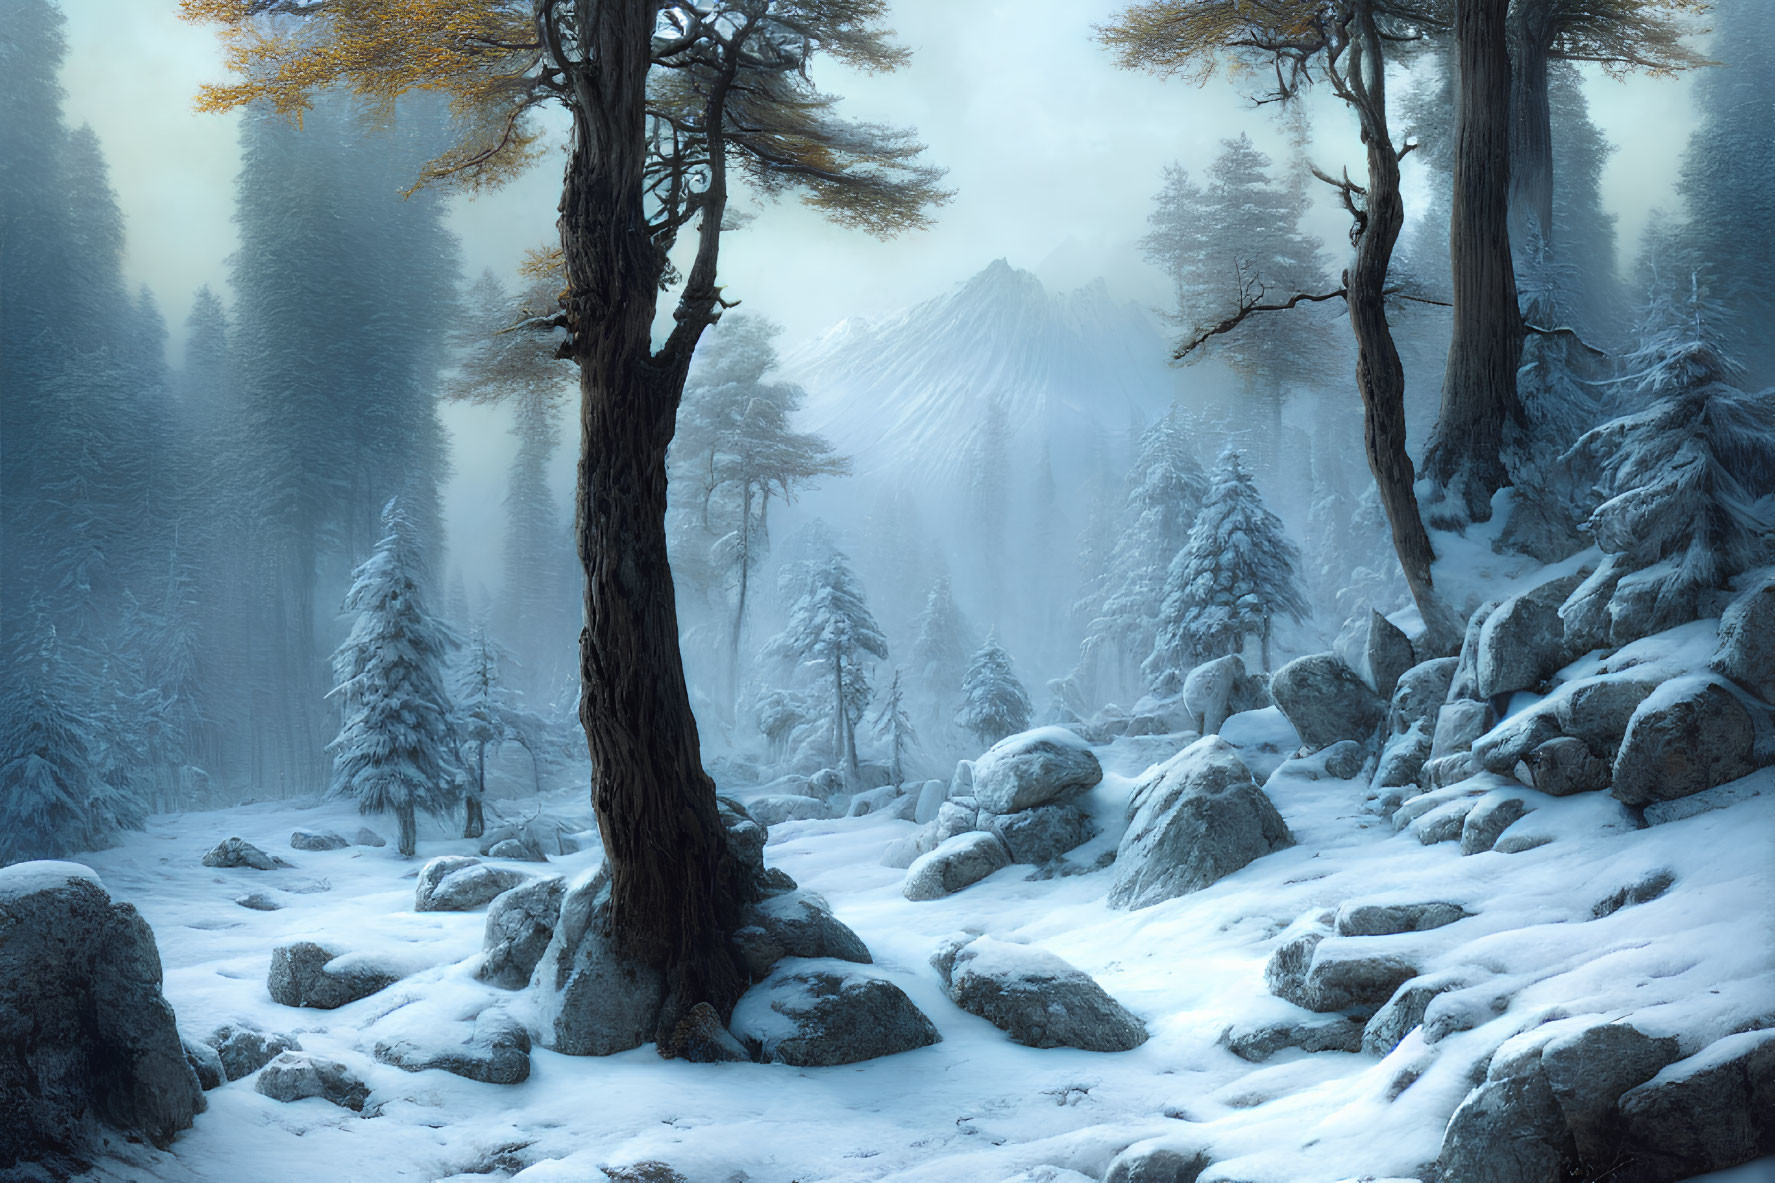 Snow-covered winter forest with misty atmosphere